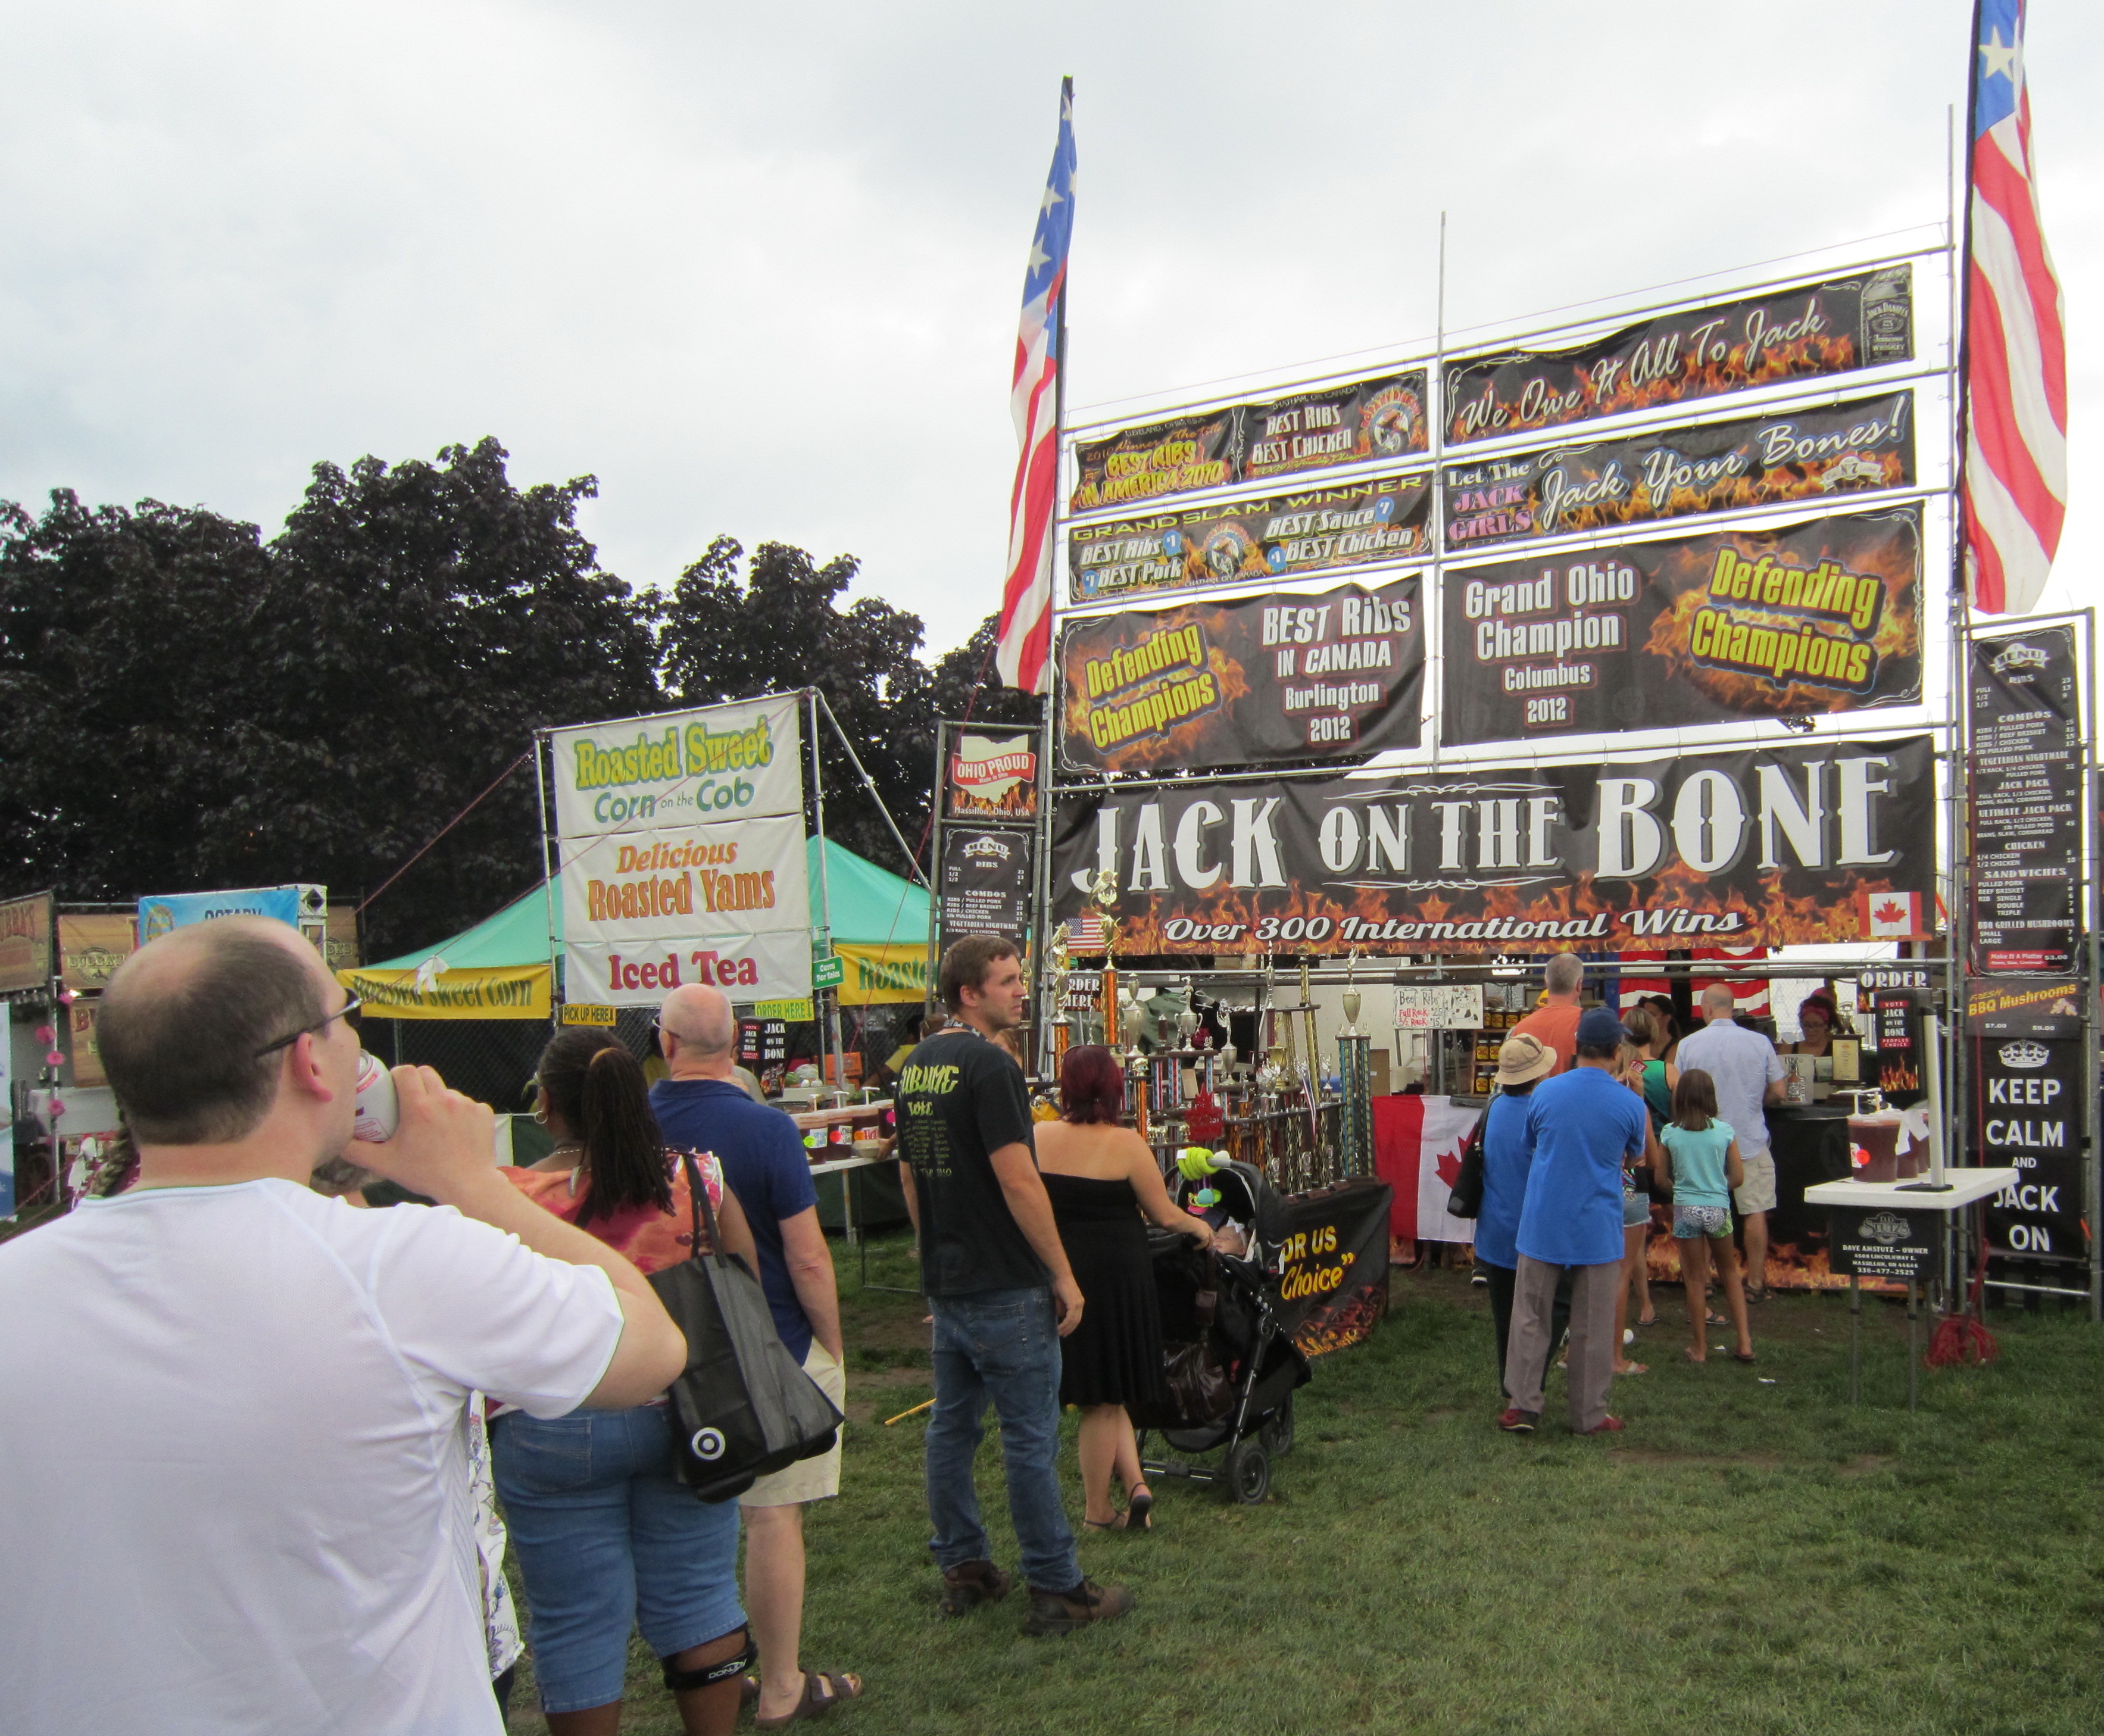 The length of the line-up told which ribs were most popular.